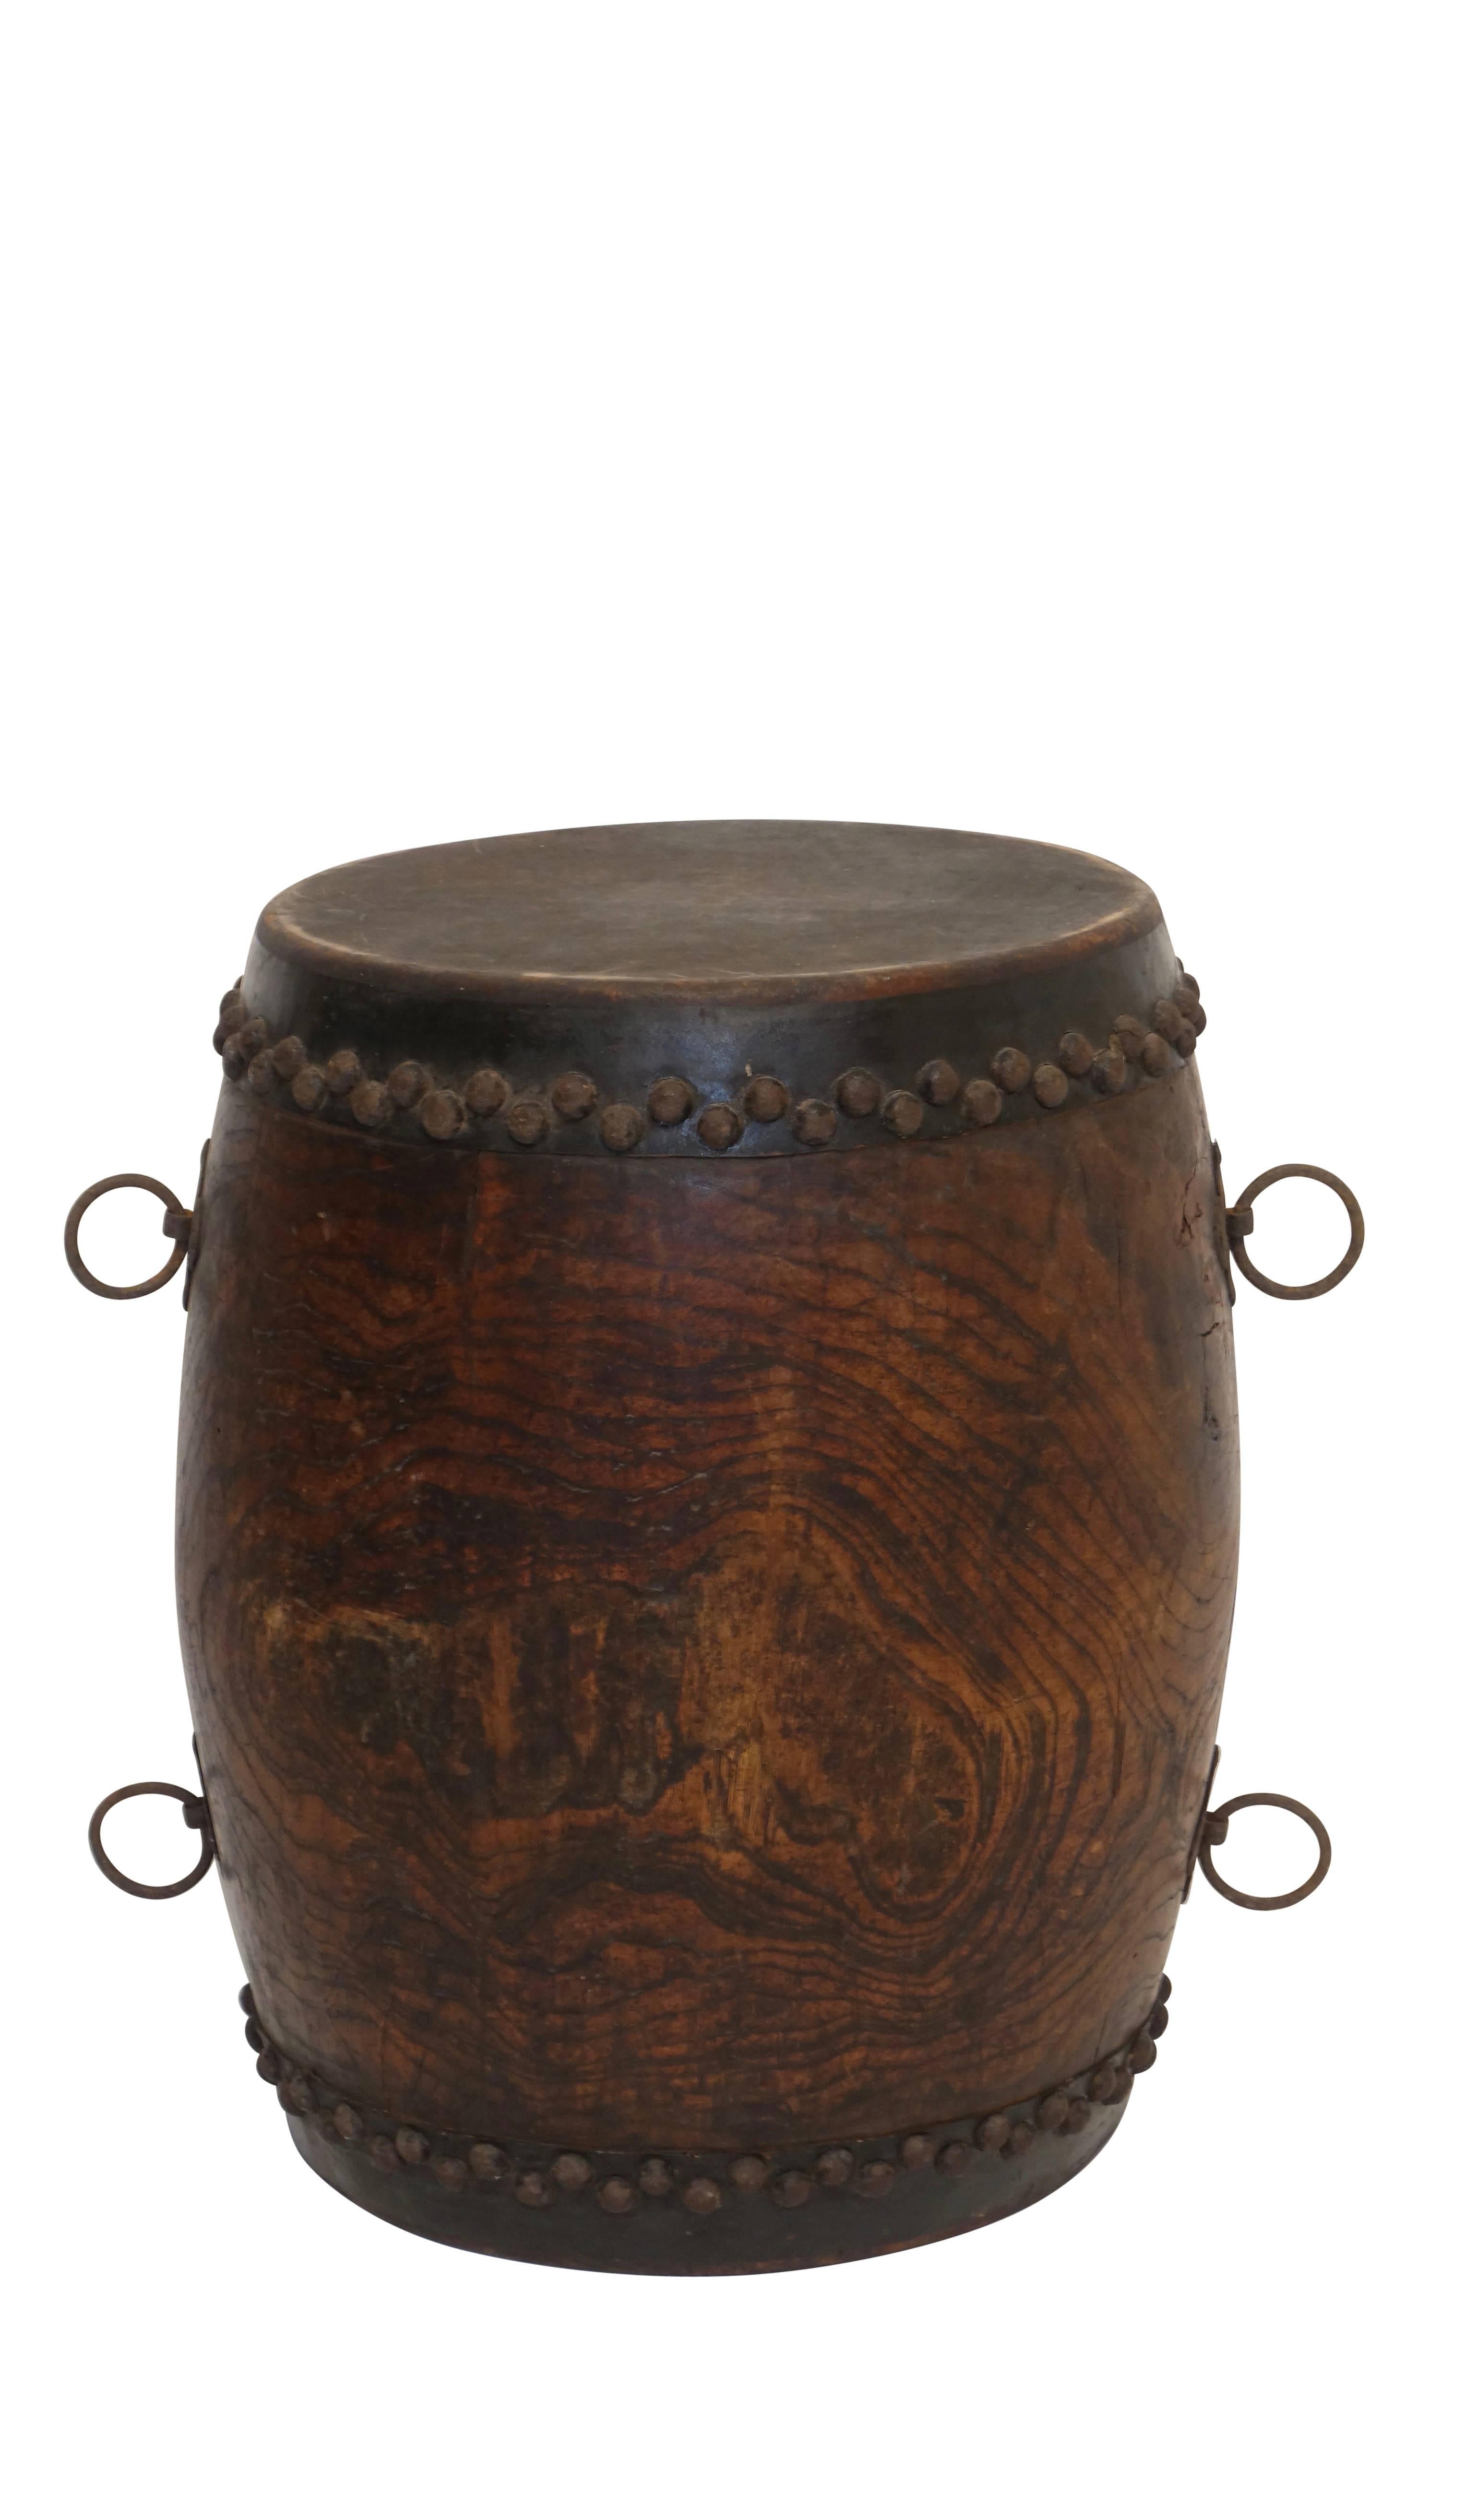 Beautifully grained wood drum with nice iron handles and tacks. Can be used as side tables.
Tanggu drum. The tanggu (??; pinyin: tánggu, pronounced [t????kù]; literally "ceremonial hall drum"; sometimes spelled tang gu) is a traditional